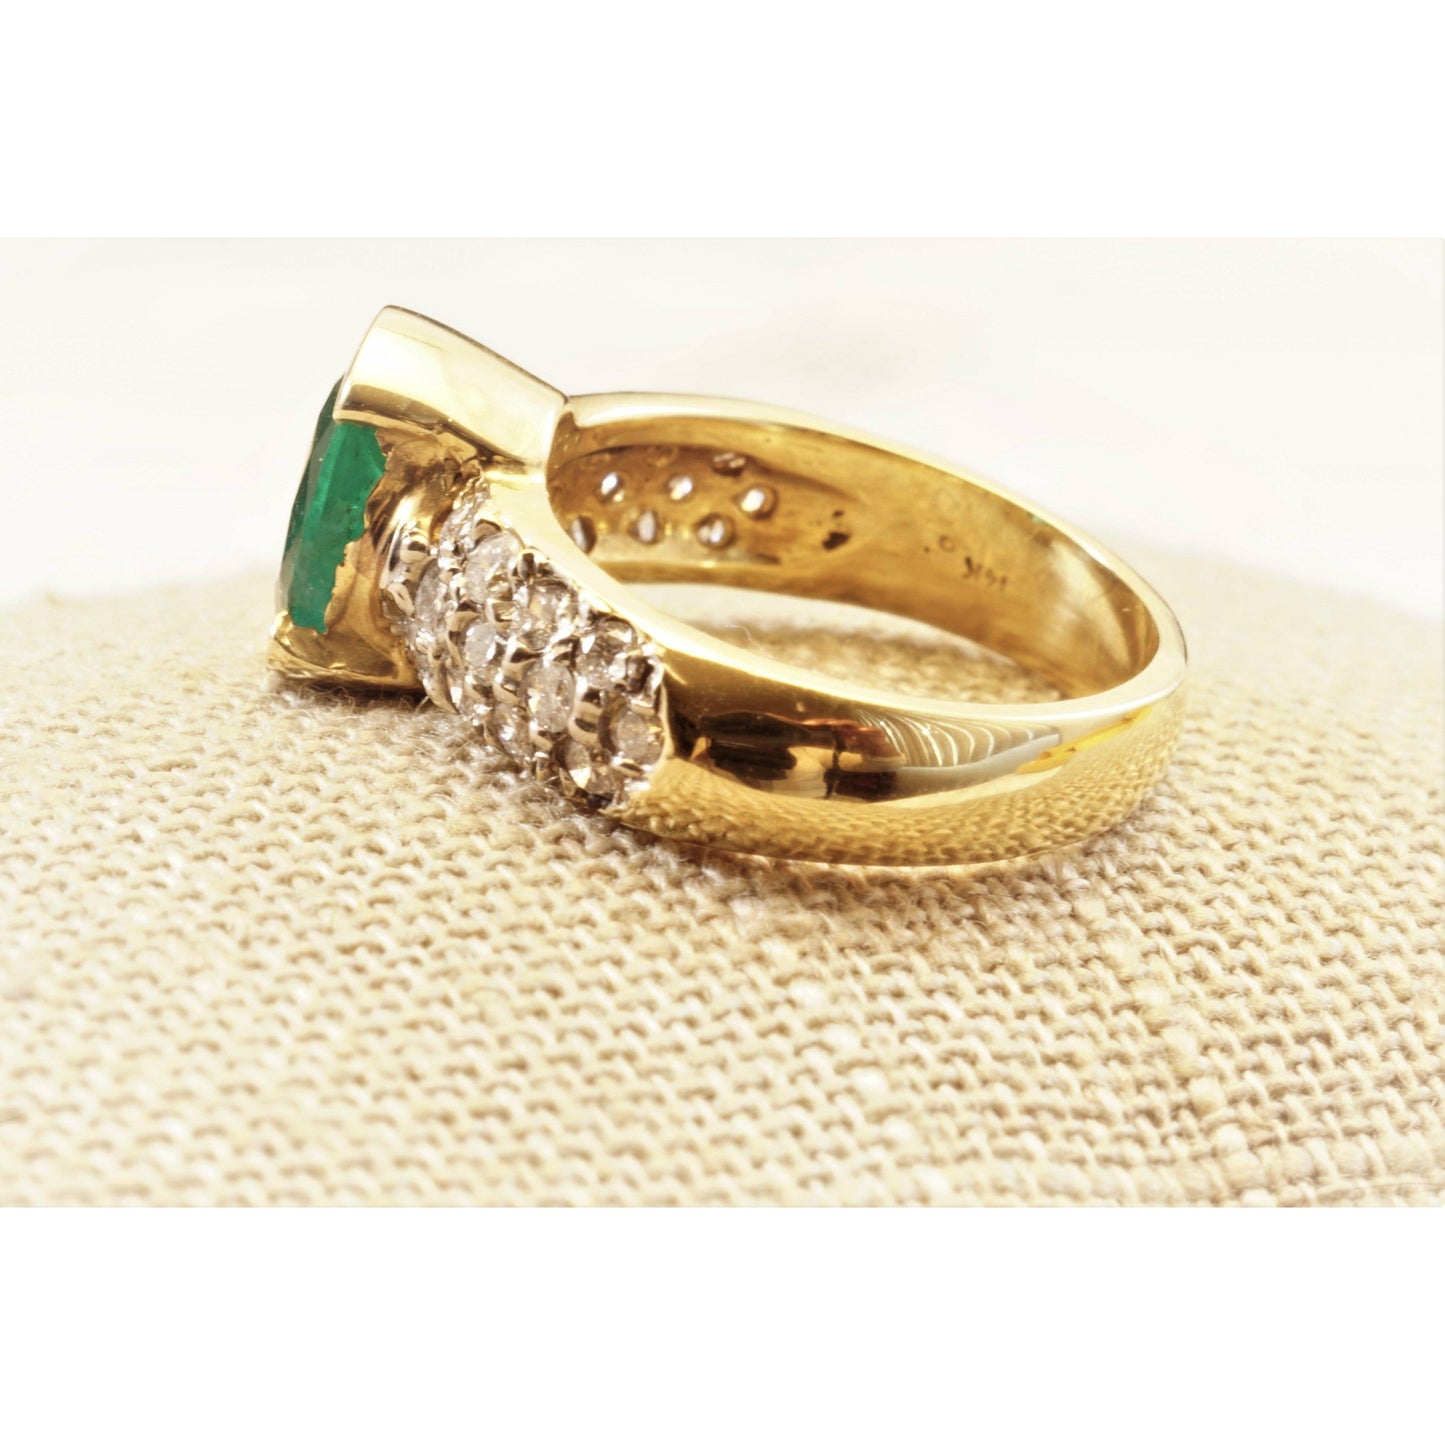 FJL Jewelry Gemstone Ring Sophistication Colombian Emerald Ring 1.85 ct. oval in semi-bezel, 14k yellow gold with 0.72 CT. in diamonds